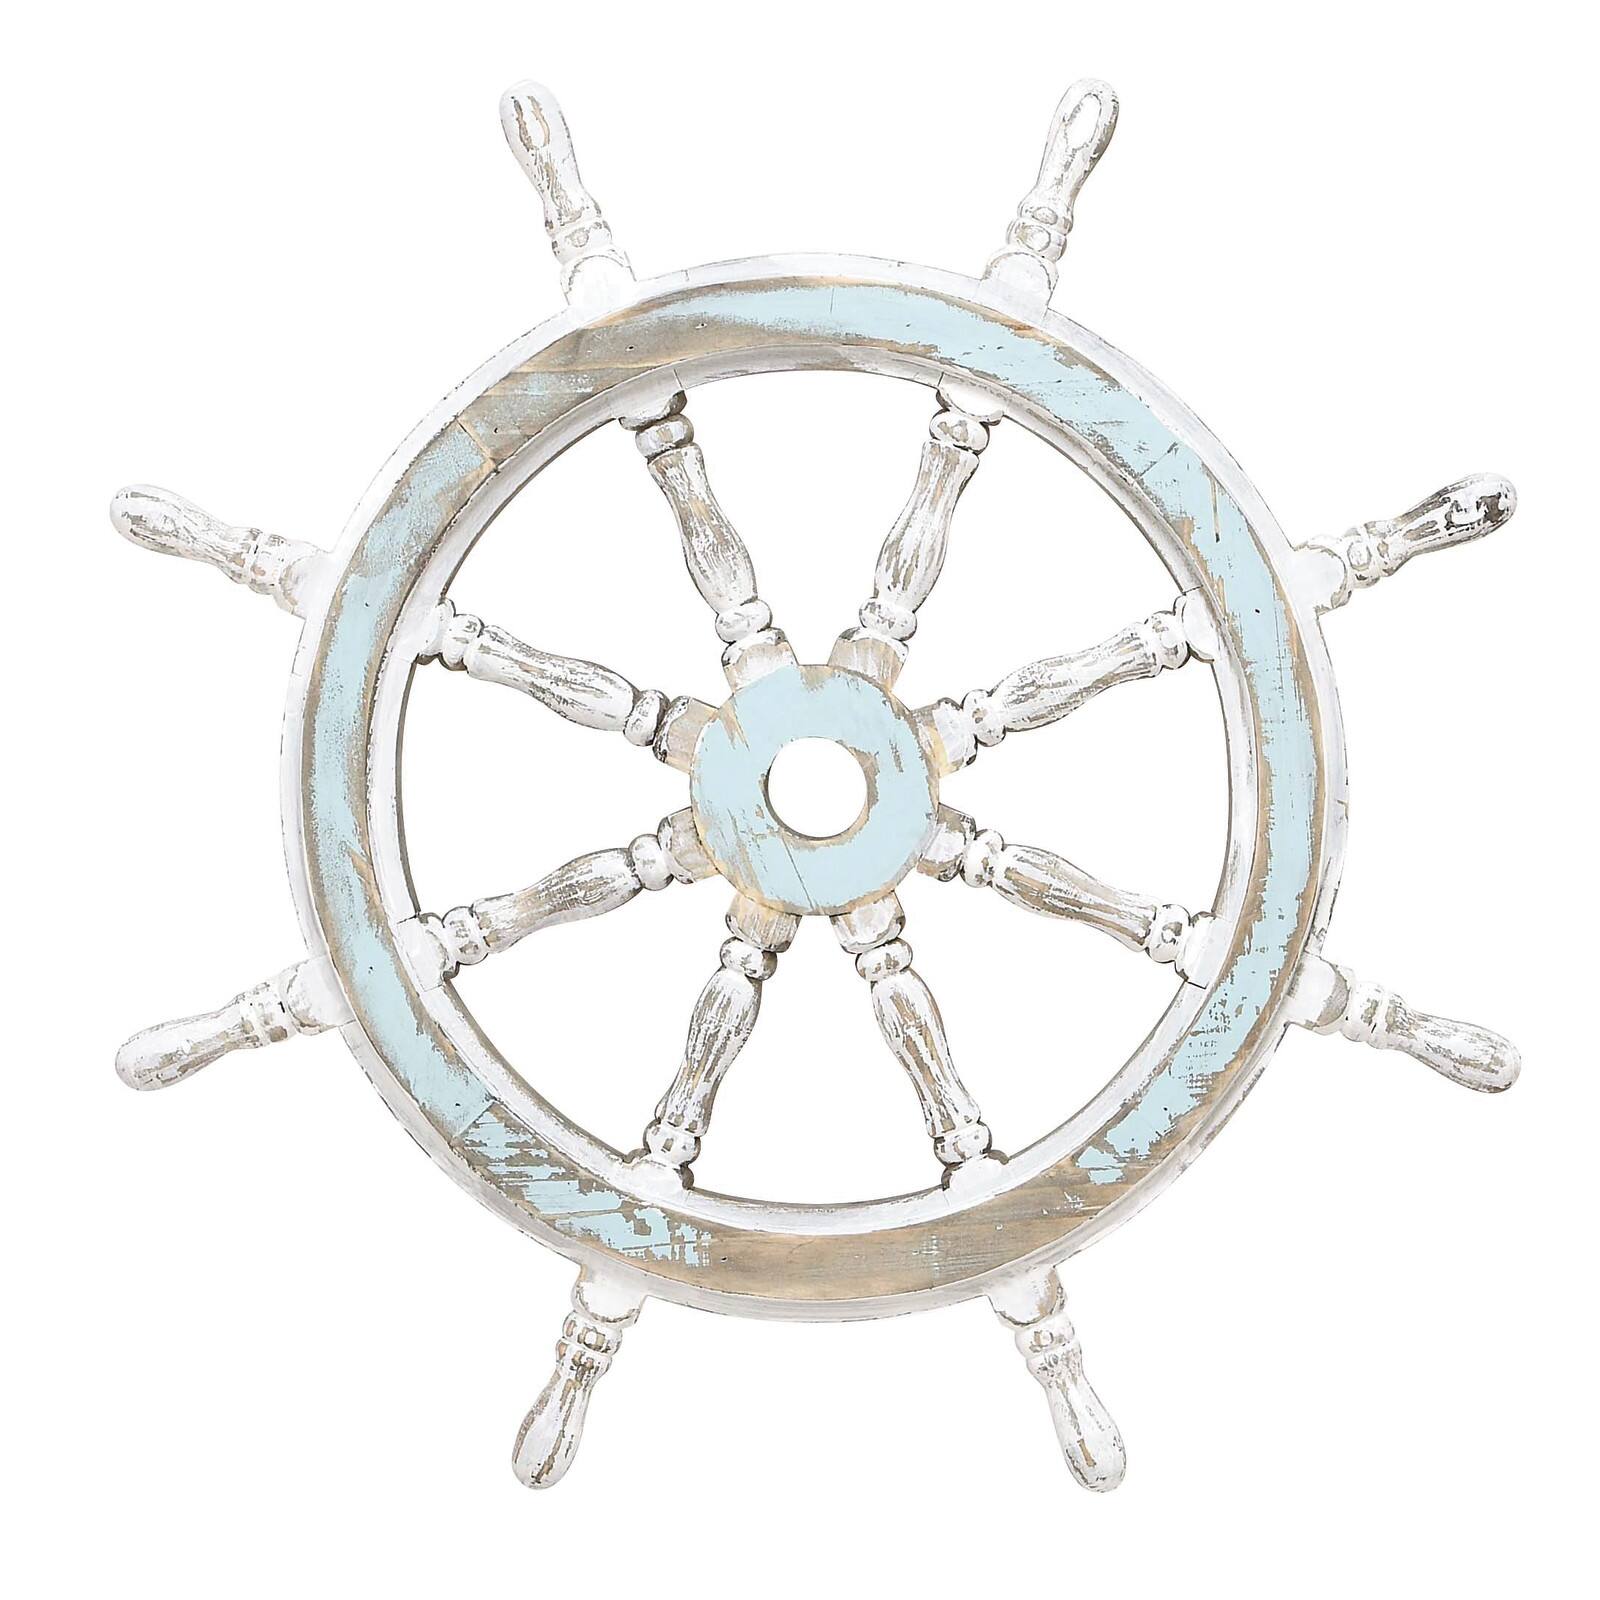 Ships Wheel Wooden Mirror in Blue and White Seaside Beach Decor Nautical Boat 